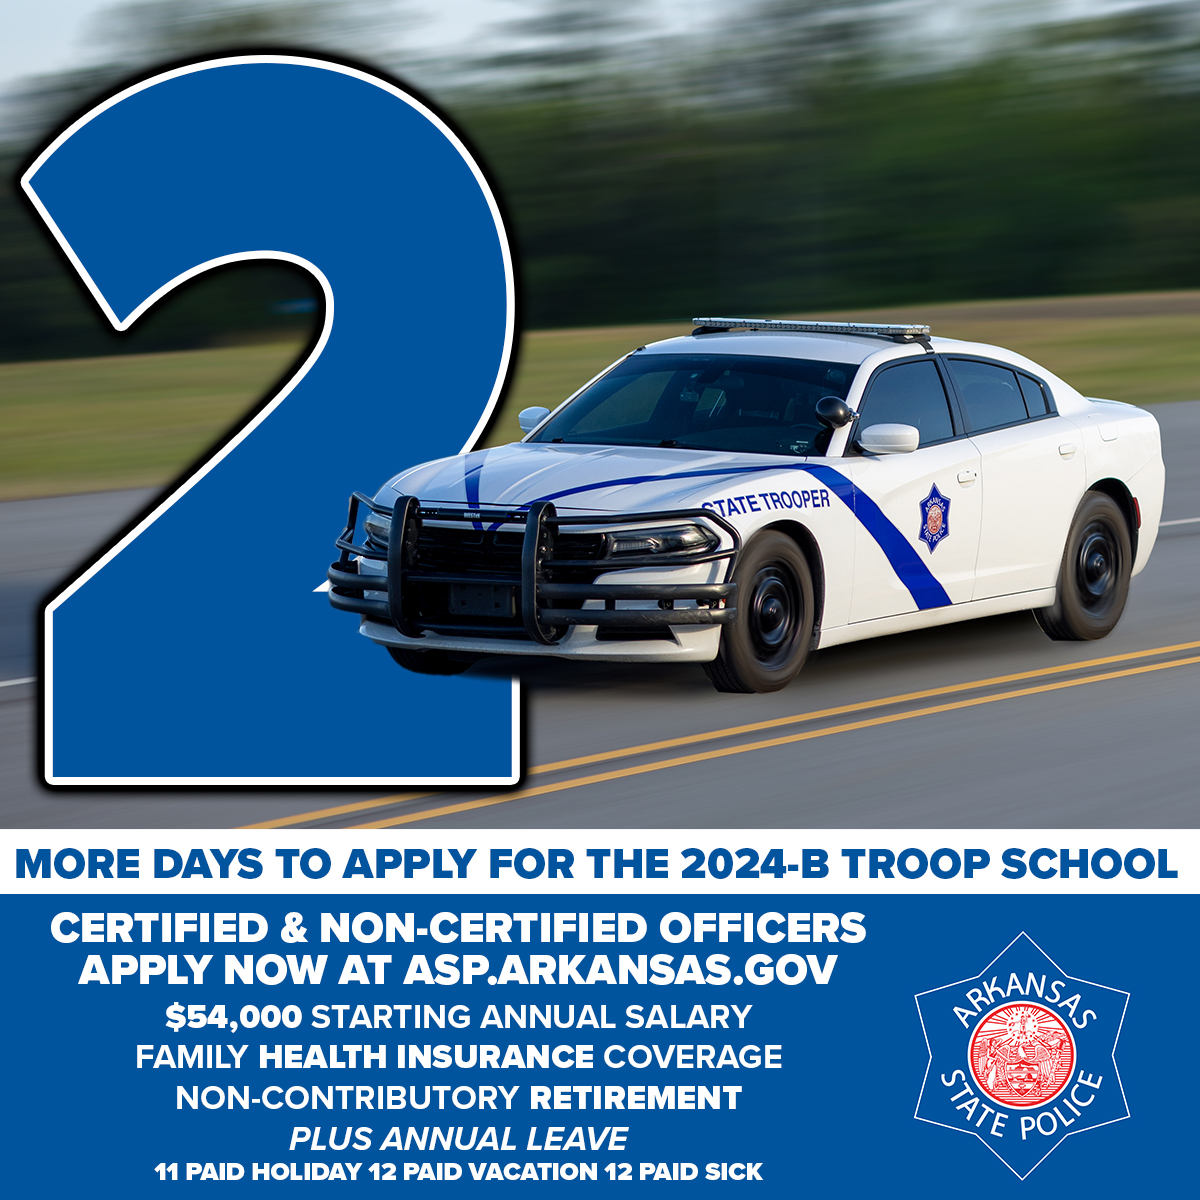 There's ONLY 2 MORE DAYS left to apply for Troop School 2024-B! The school, scheduled to begin in October, is open to CERTIFIED AND NON-CERTIFIED applicants. Visit: bit.ly/ASPTroopSchool… for details on the application process. APPLICATION DEADLINE: 04/30/2024 – 11:59 p.m.